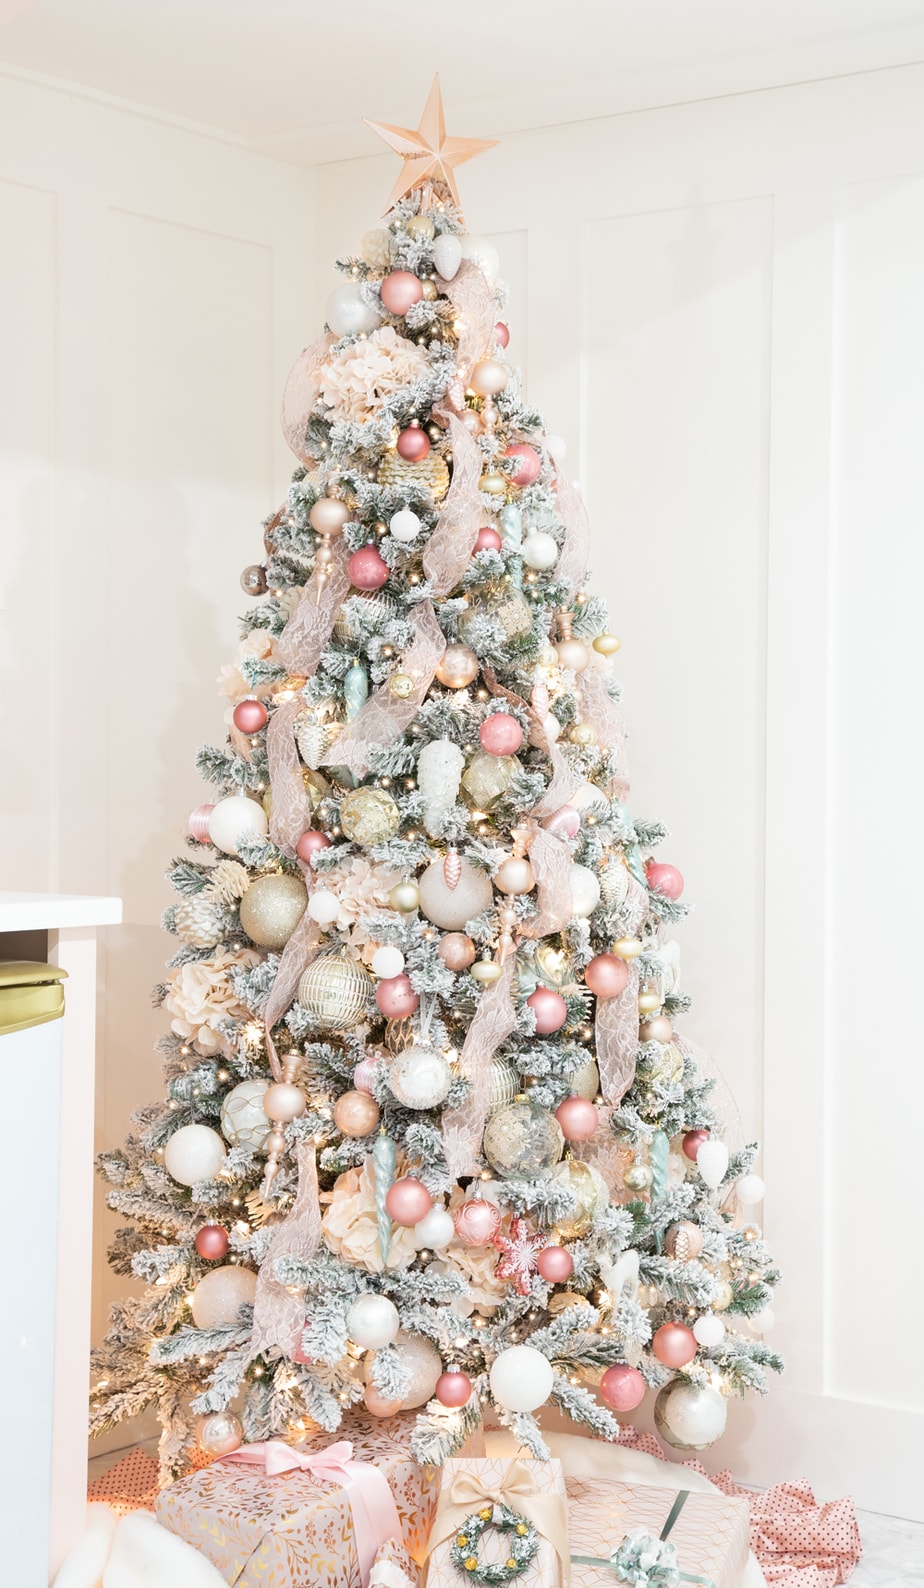 How to Decorate a Christmas Tree With Ribbon